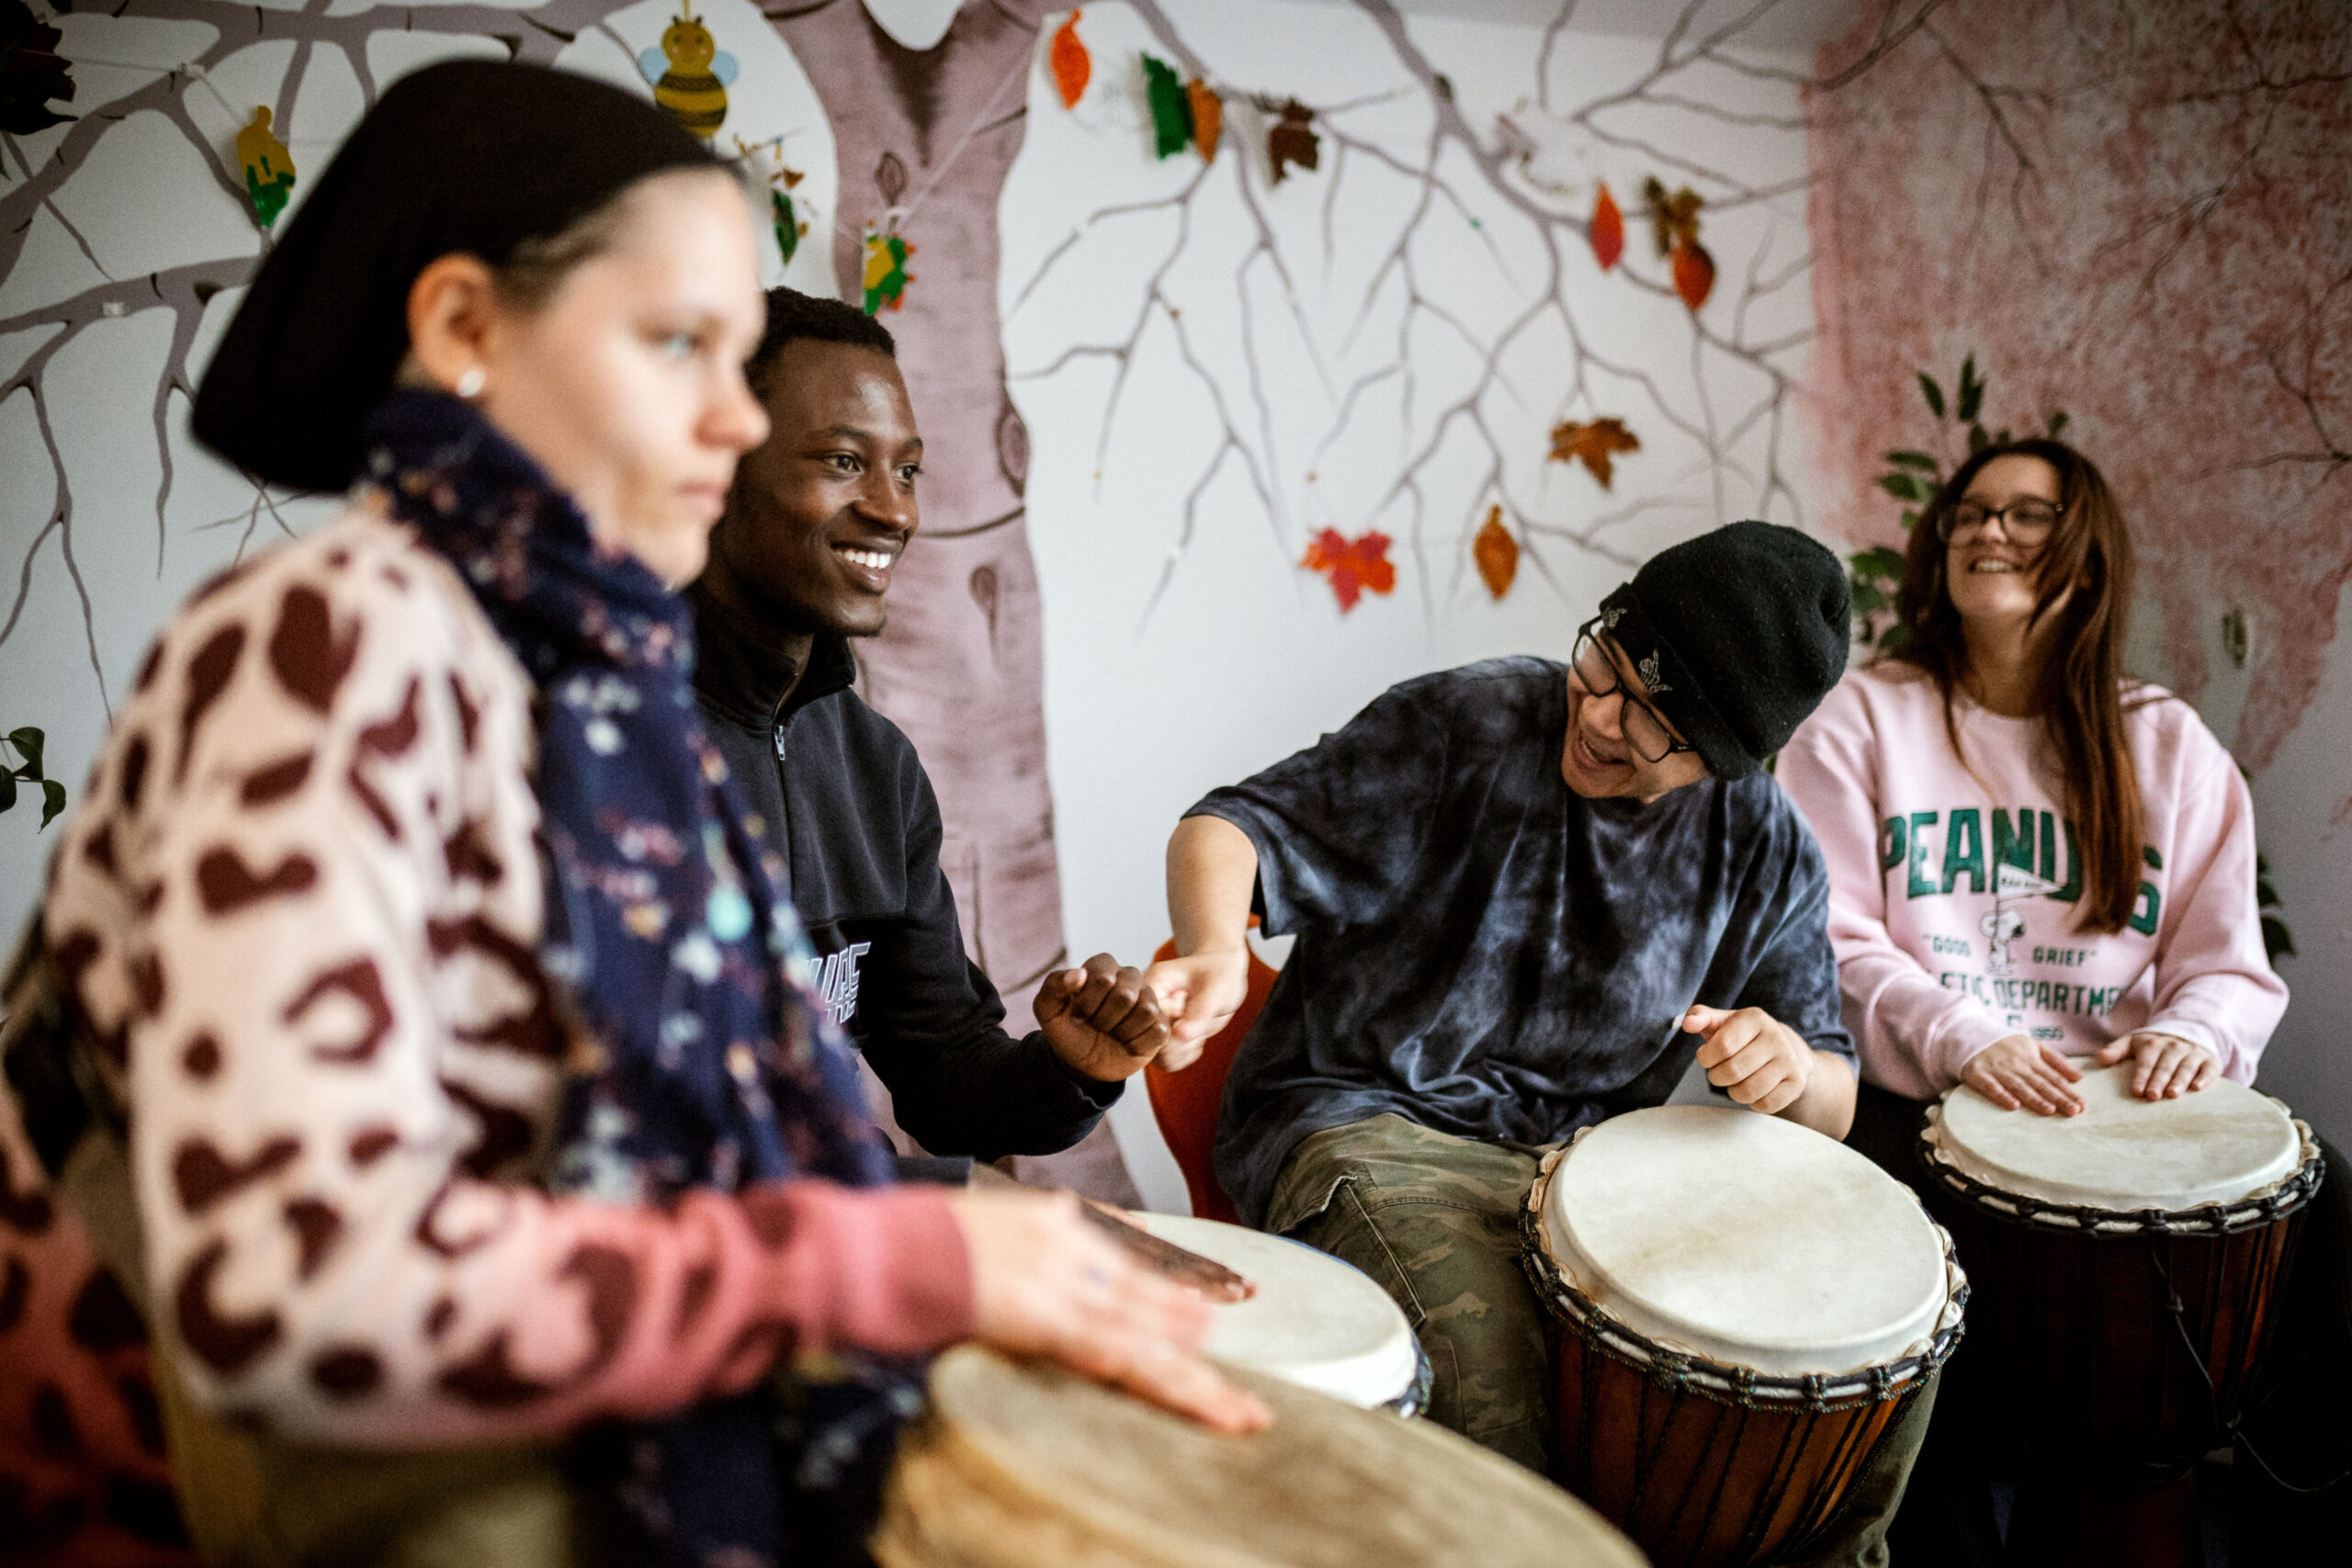 Several people playing drums